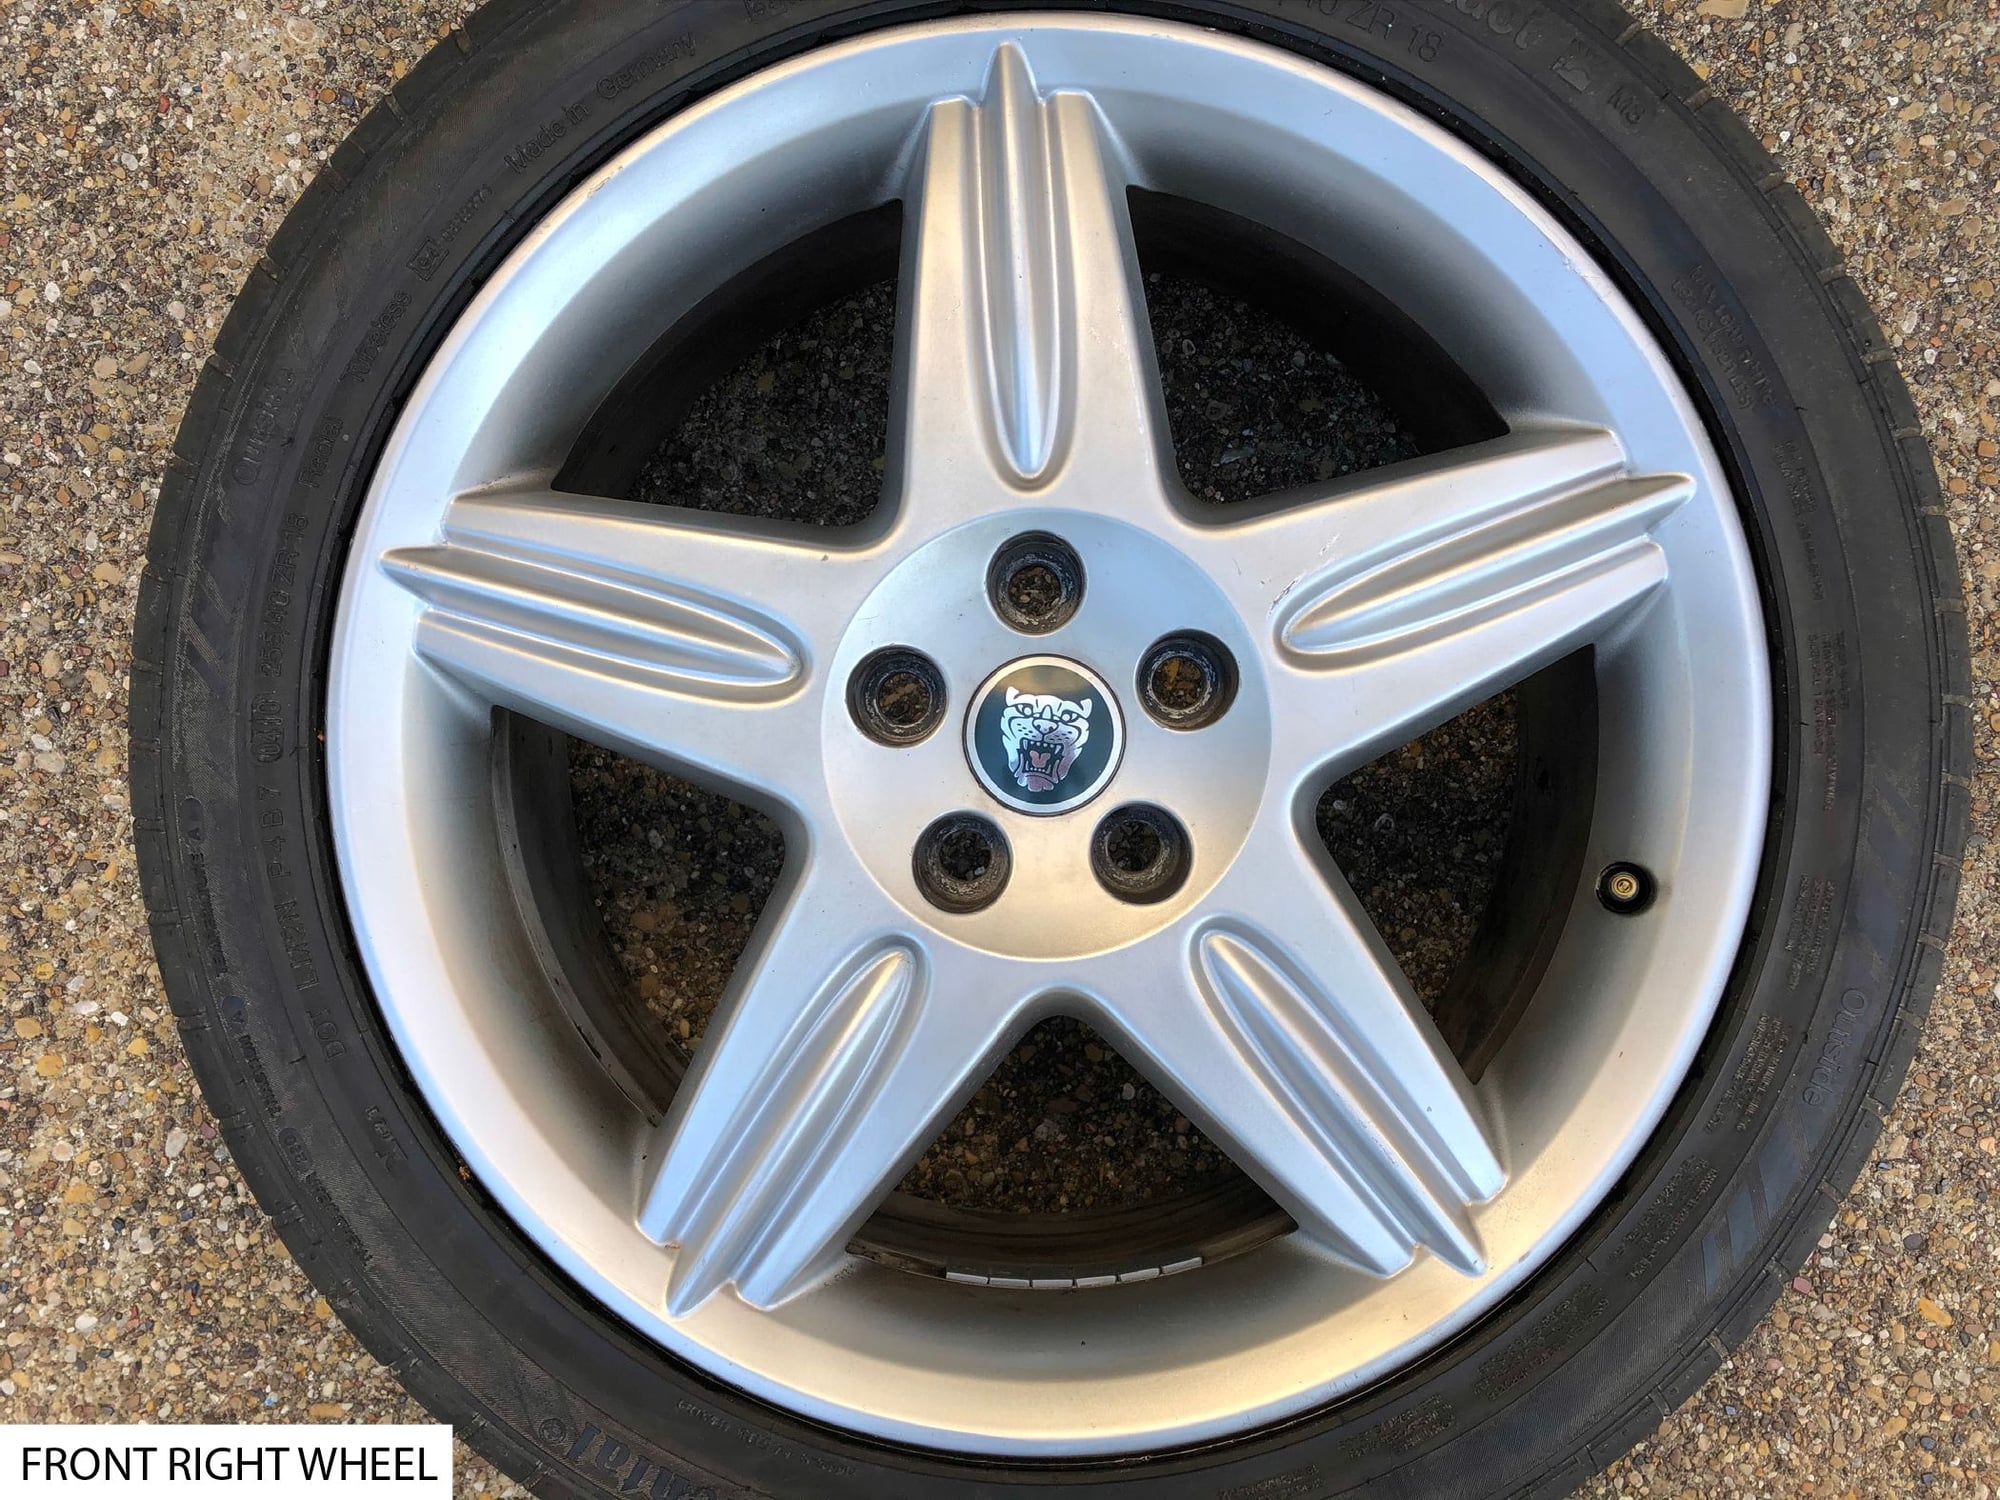 Wheels and Tires/Axles - FS Jaguar S-Type R Wheels W/ Conti Tires - Used - 2000 to 2008 Jaguar S-Type - Dallas, TX 75206, United States